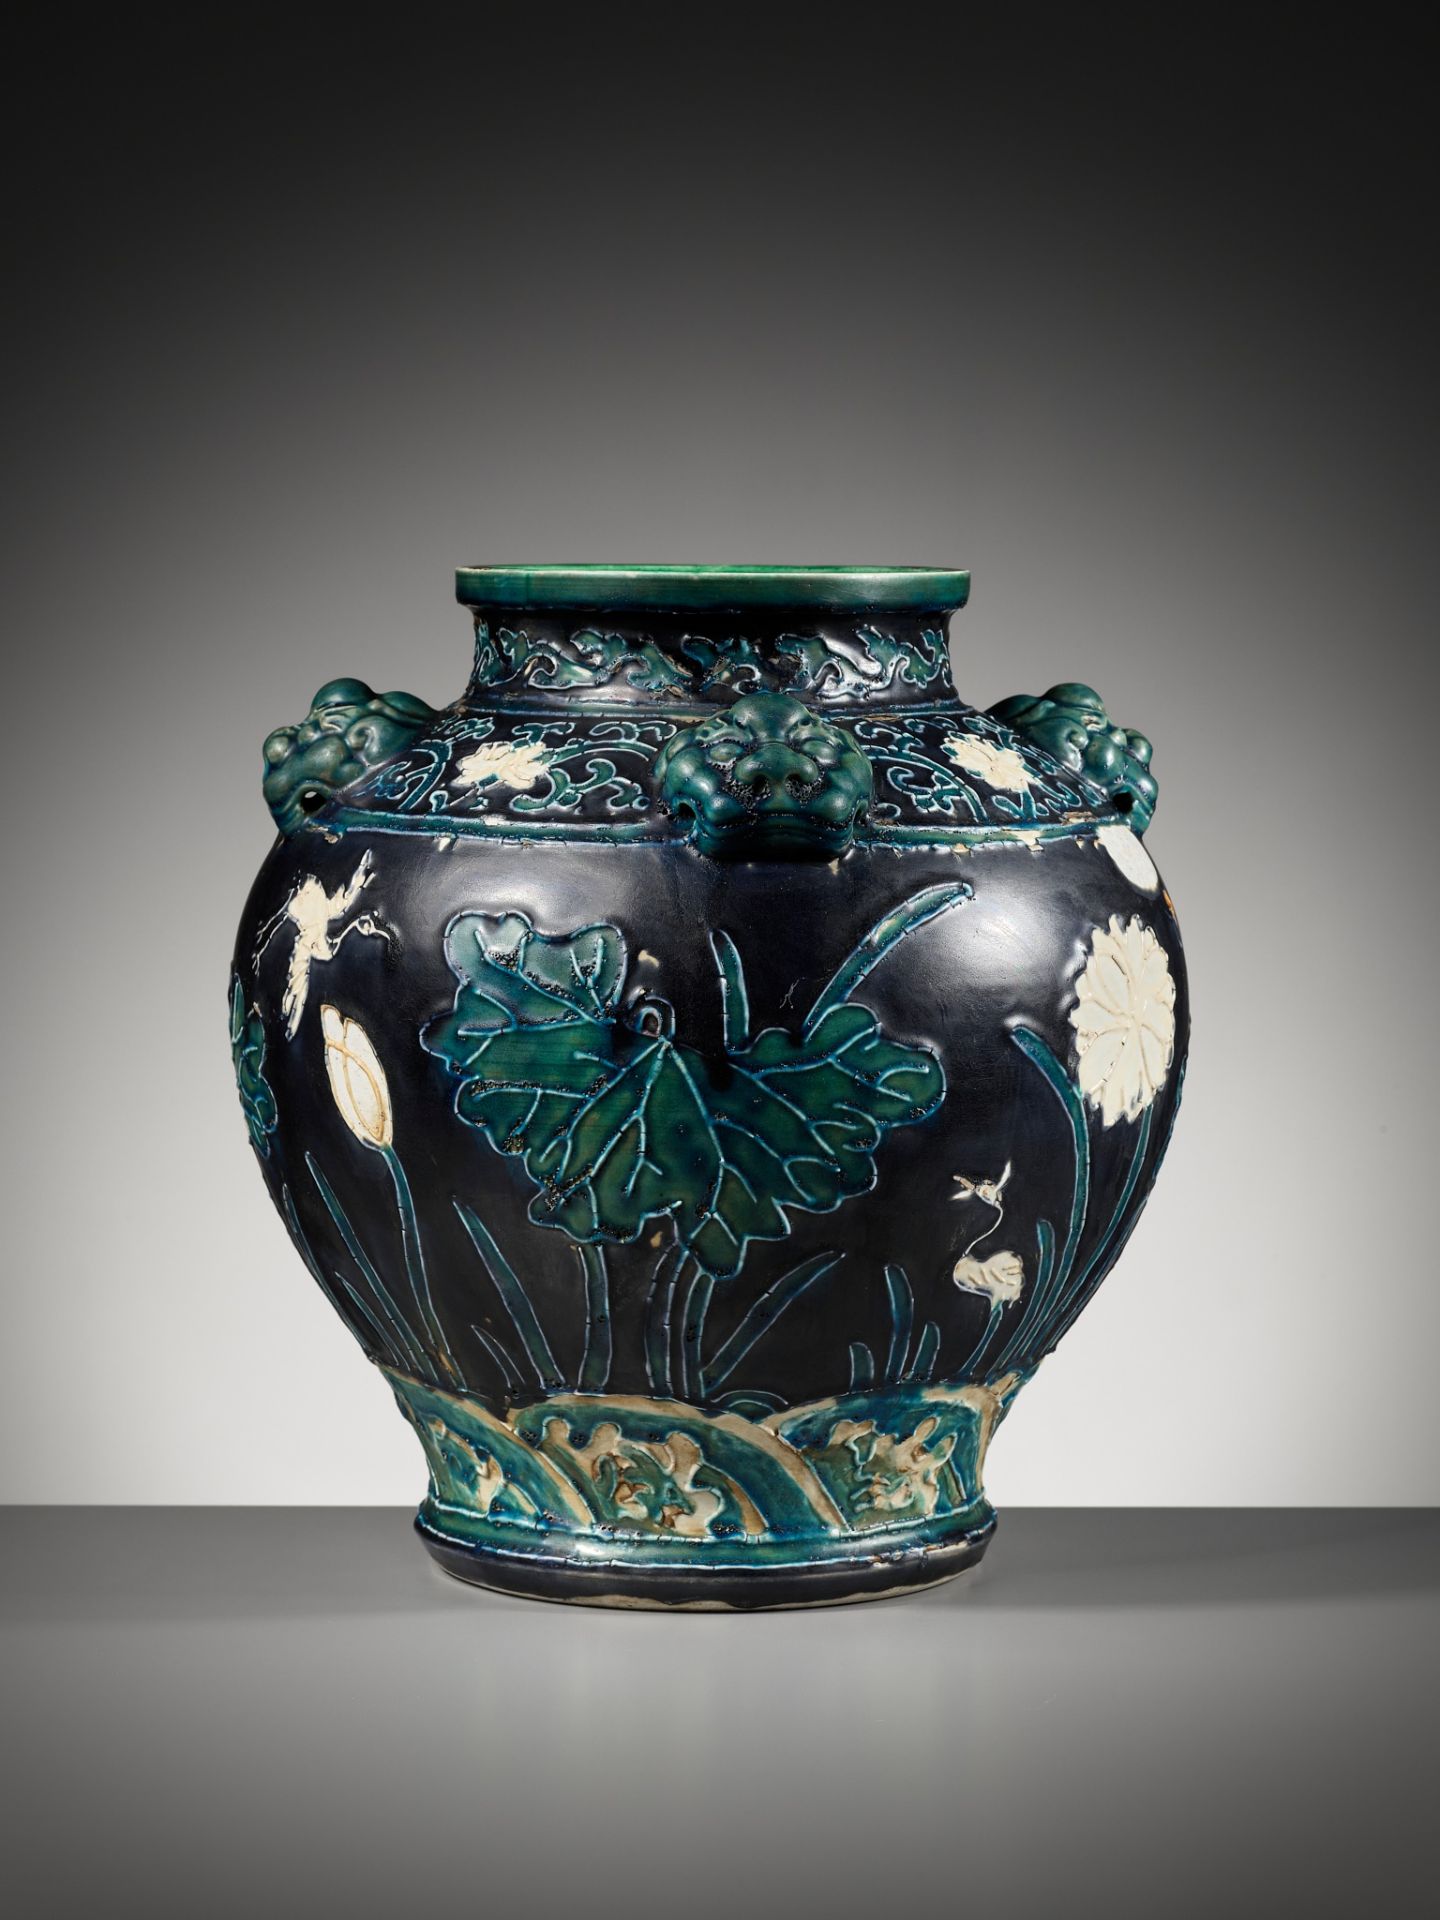 AN EARLY FAHUA-GLAZED 'LOTUS' JAR, GUAN, WITH FOUR LION-MASK HANDLES, MING DYNASTY - Image 6 of 14